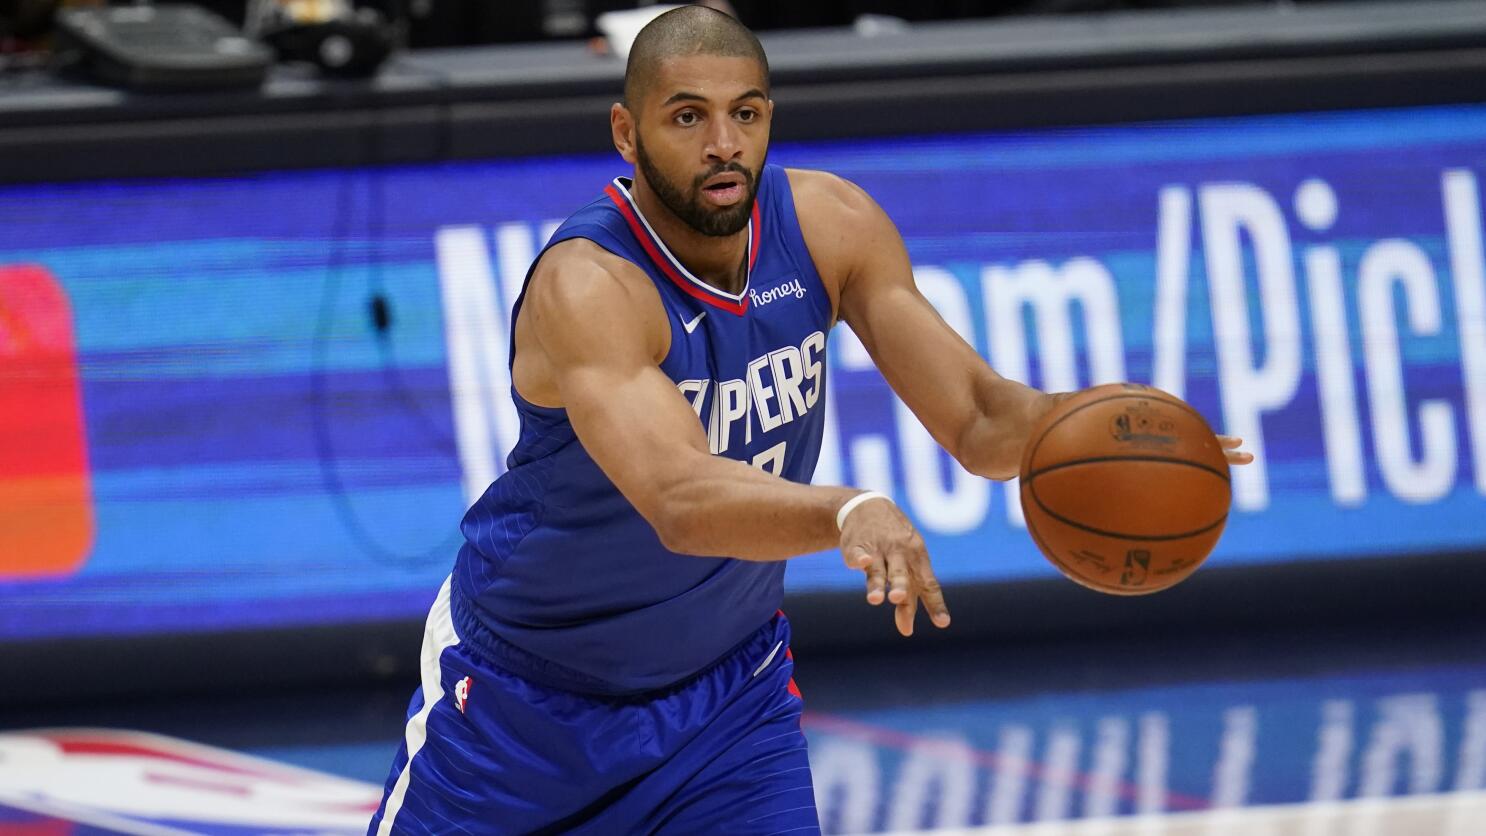 Nicolas Batum Waived By Hornets, Plans To Sign With Clippers